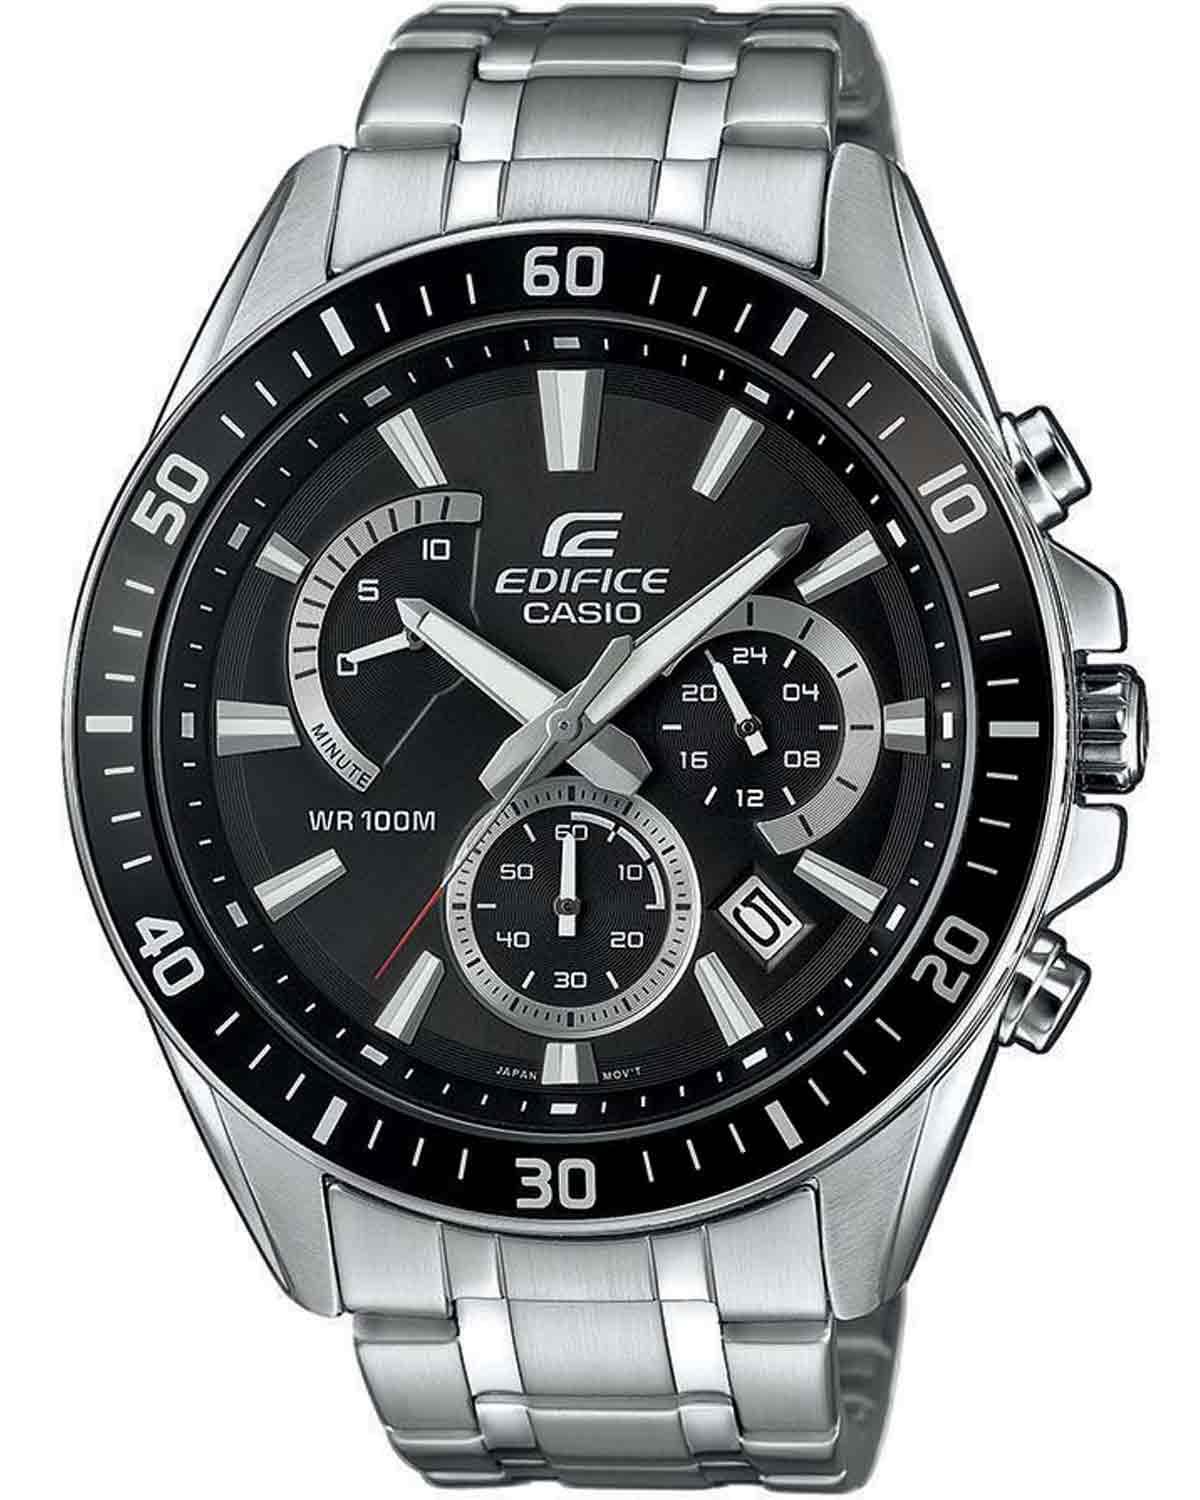 CASIO Edifice Chronograph - EFR-552D-1AVUEF Silver case, with Stainless Steel Bracelet